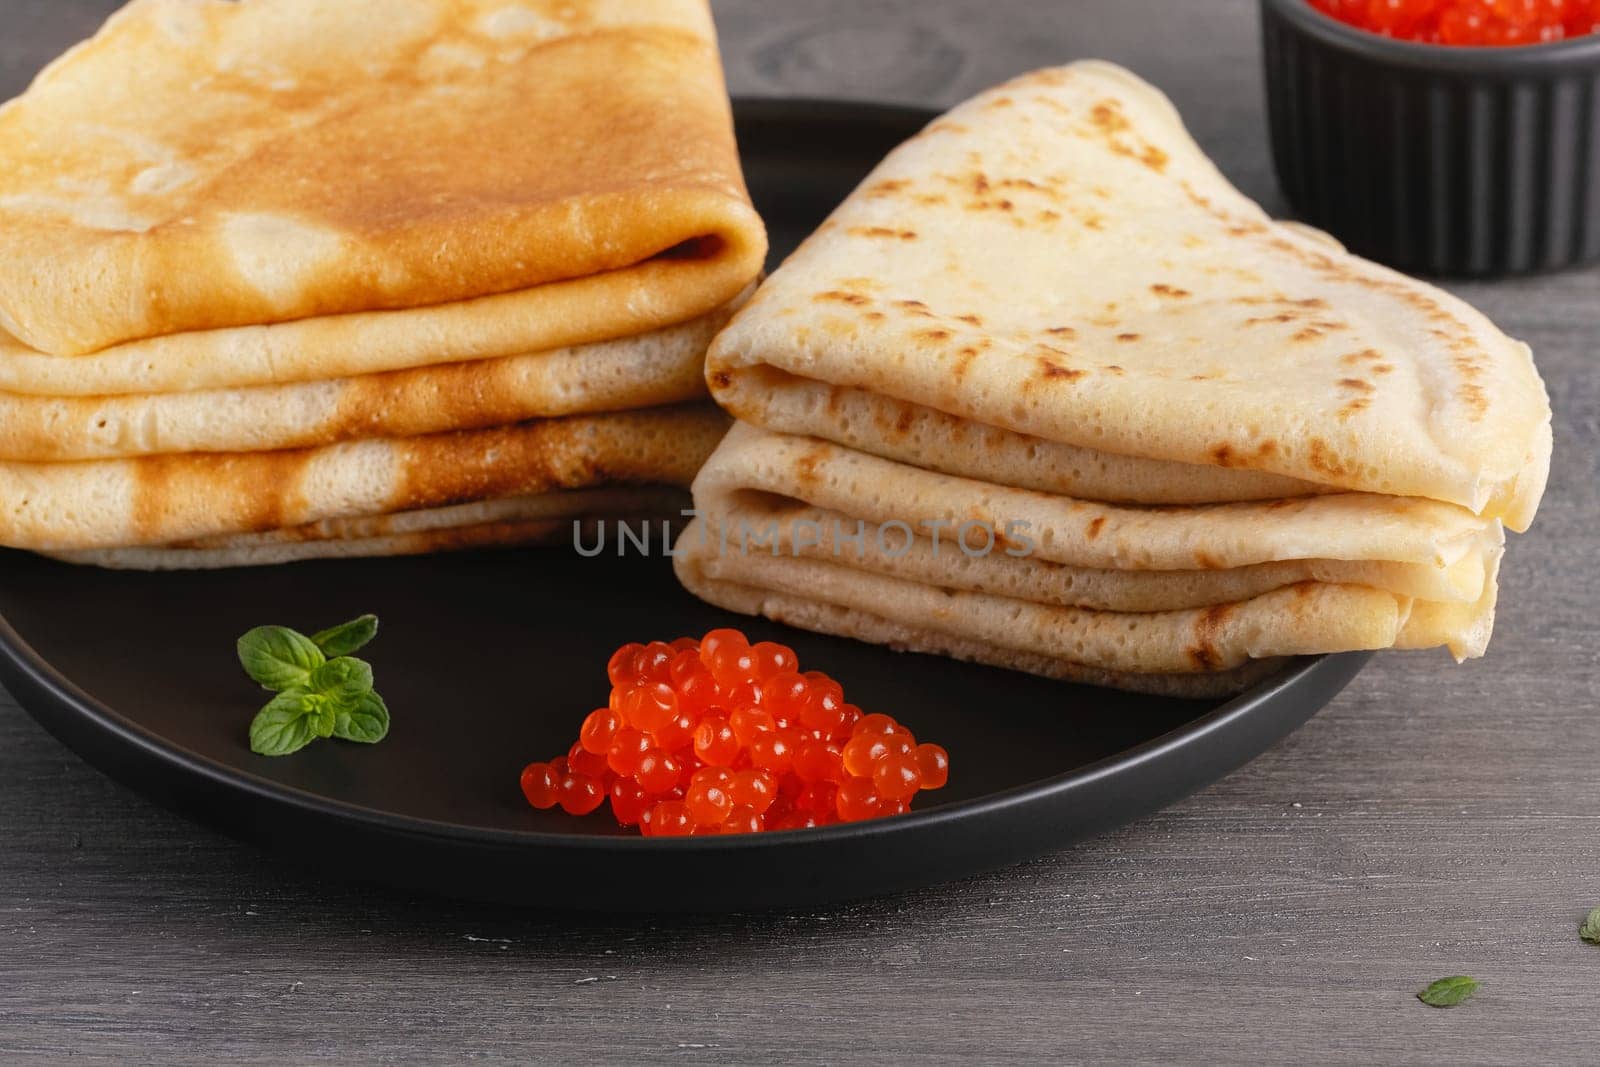 Pancakes with red caviar. Close-up of pancakes stacked on grey background.